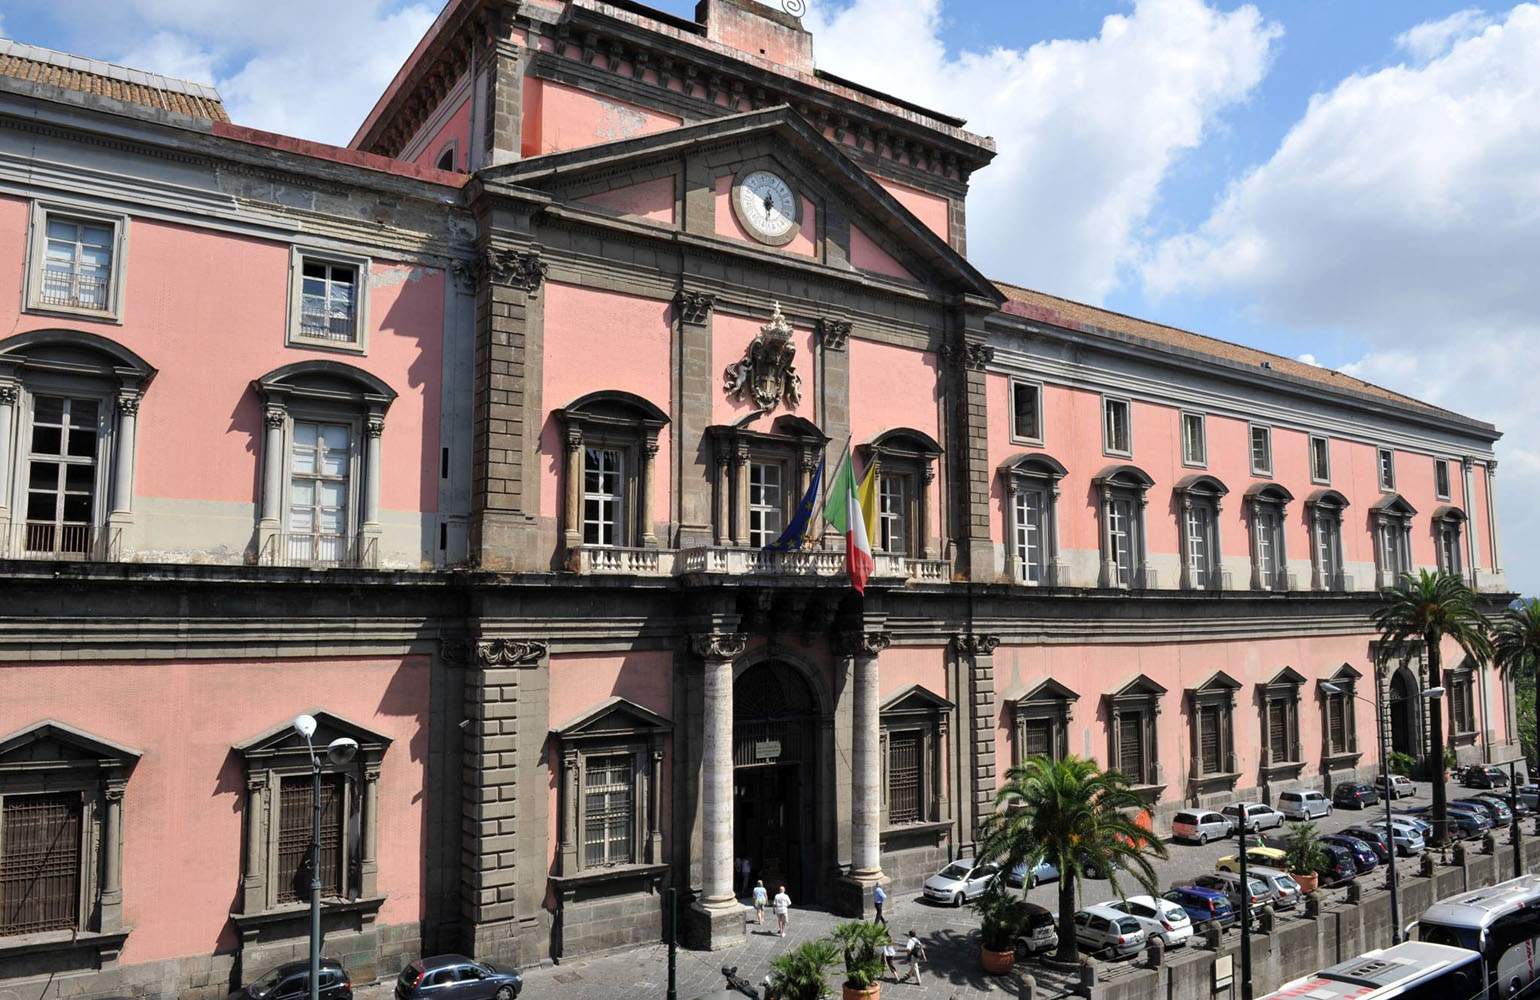 Naples, MANN signs enhancement agreements with industrial union and prosecutor's office